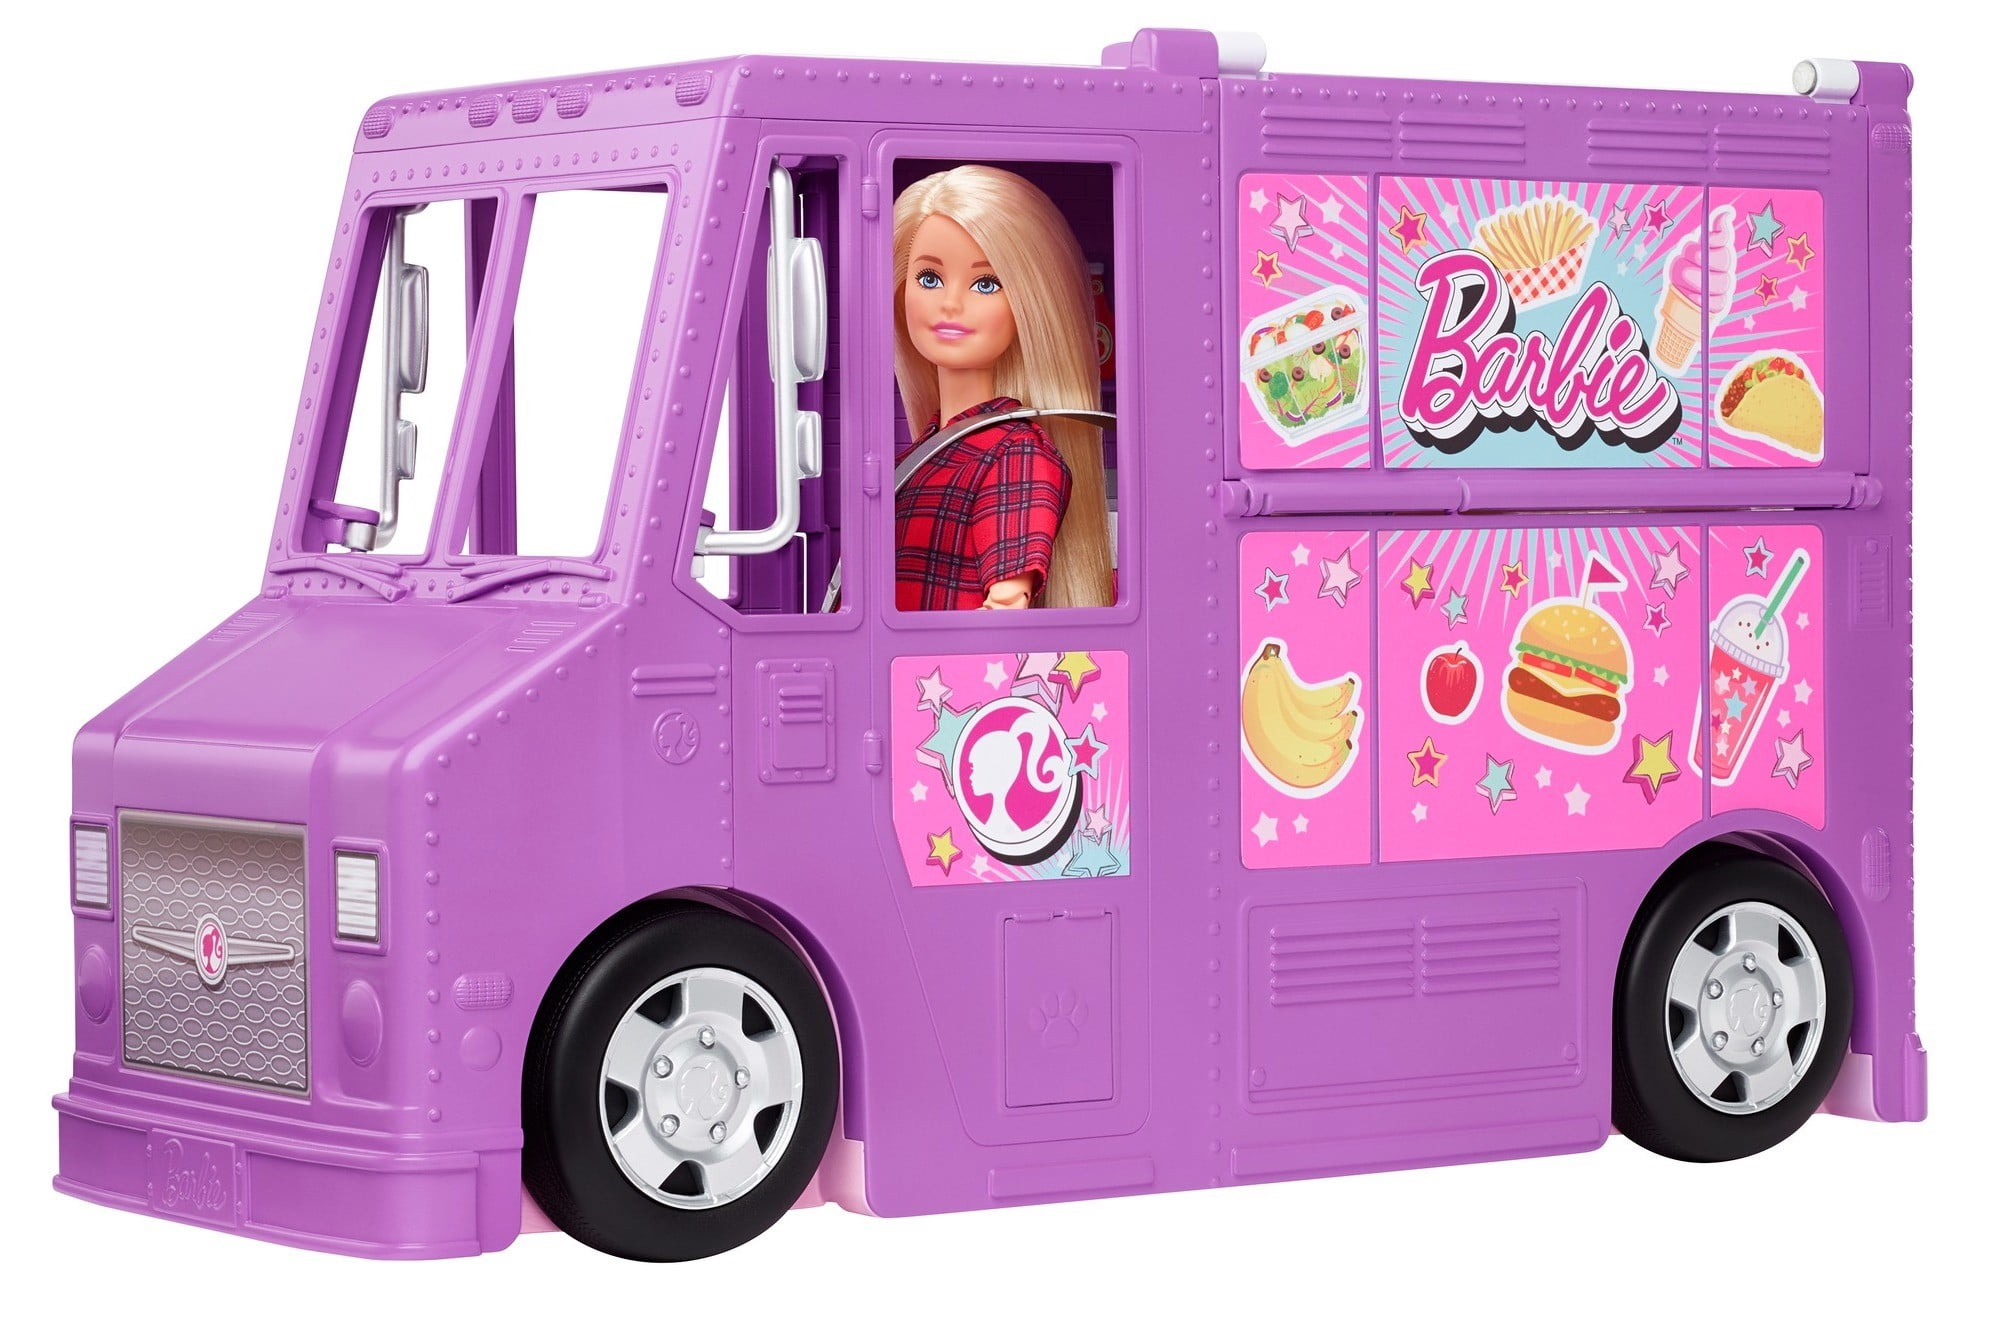 Realistic Play Pieces Kids Toy Barbie Food Truck With Multiple Play Areas w/ 30 